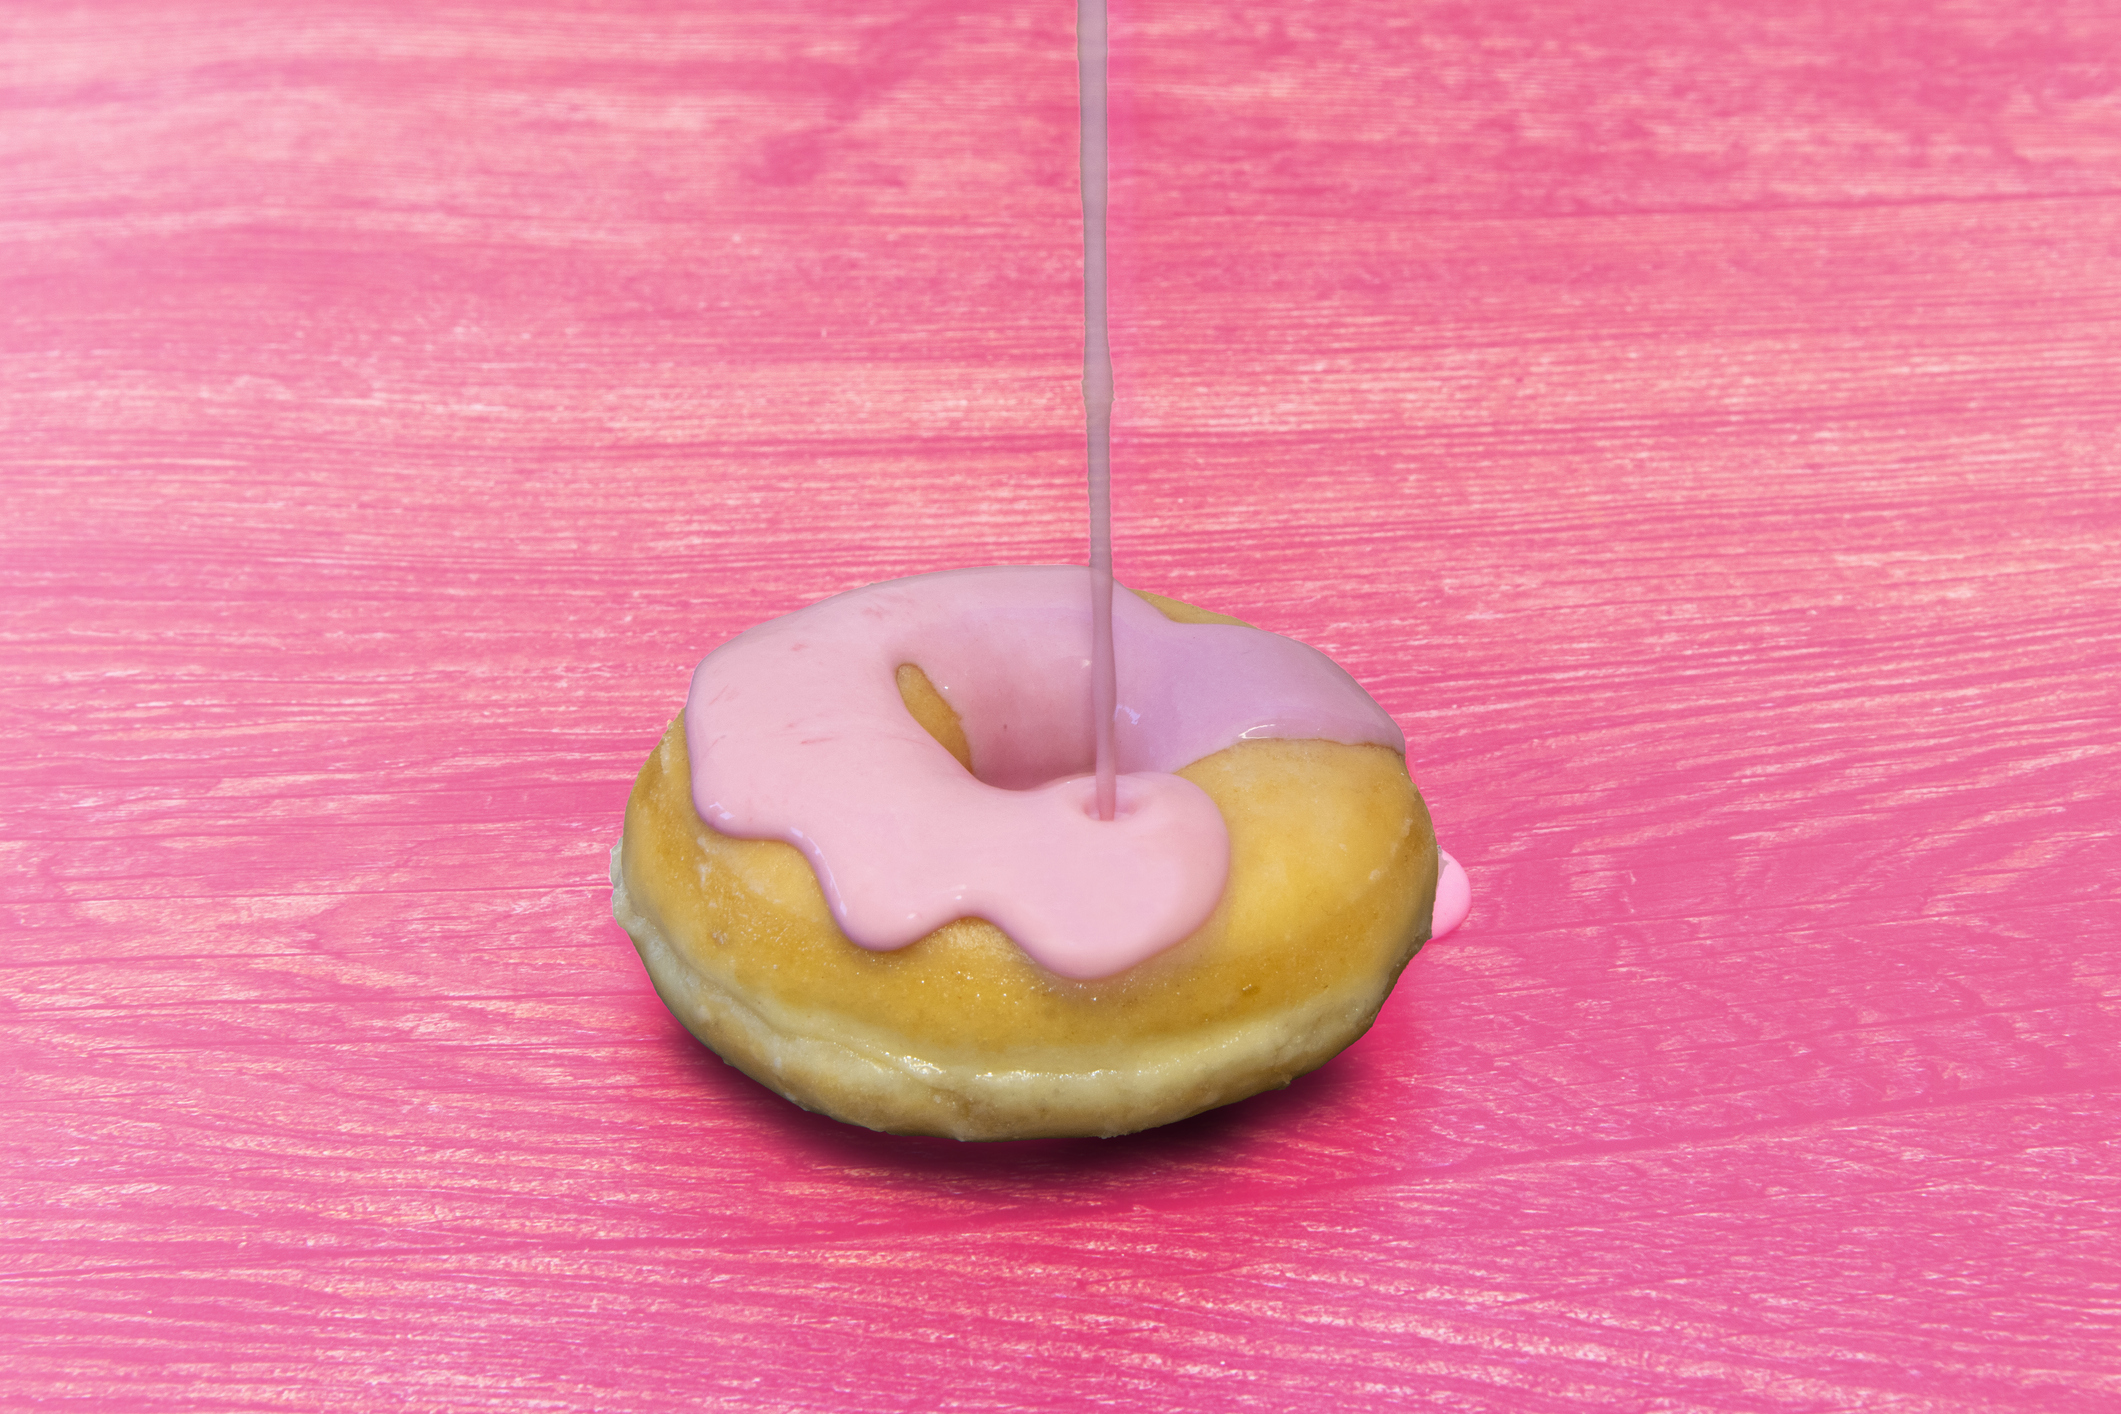 donuts with pink sauces on a pink table